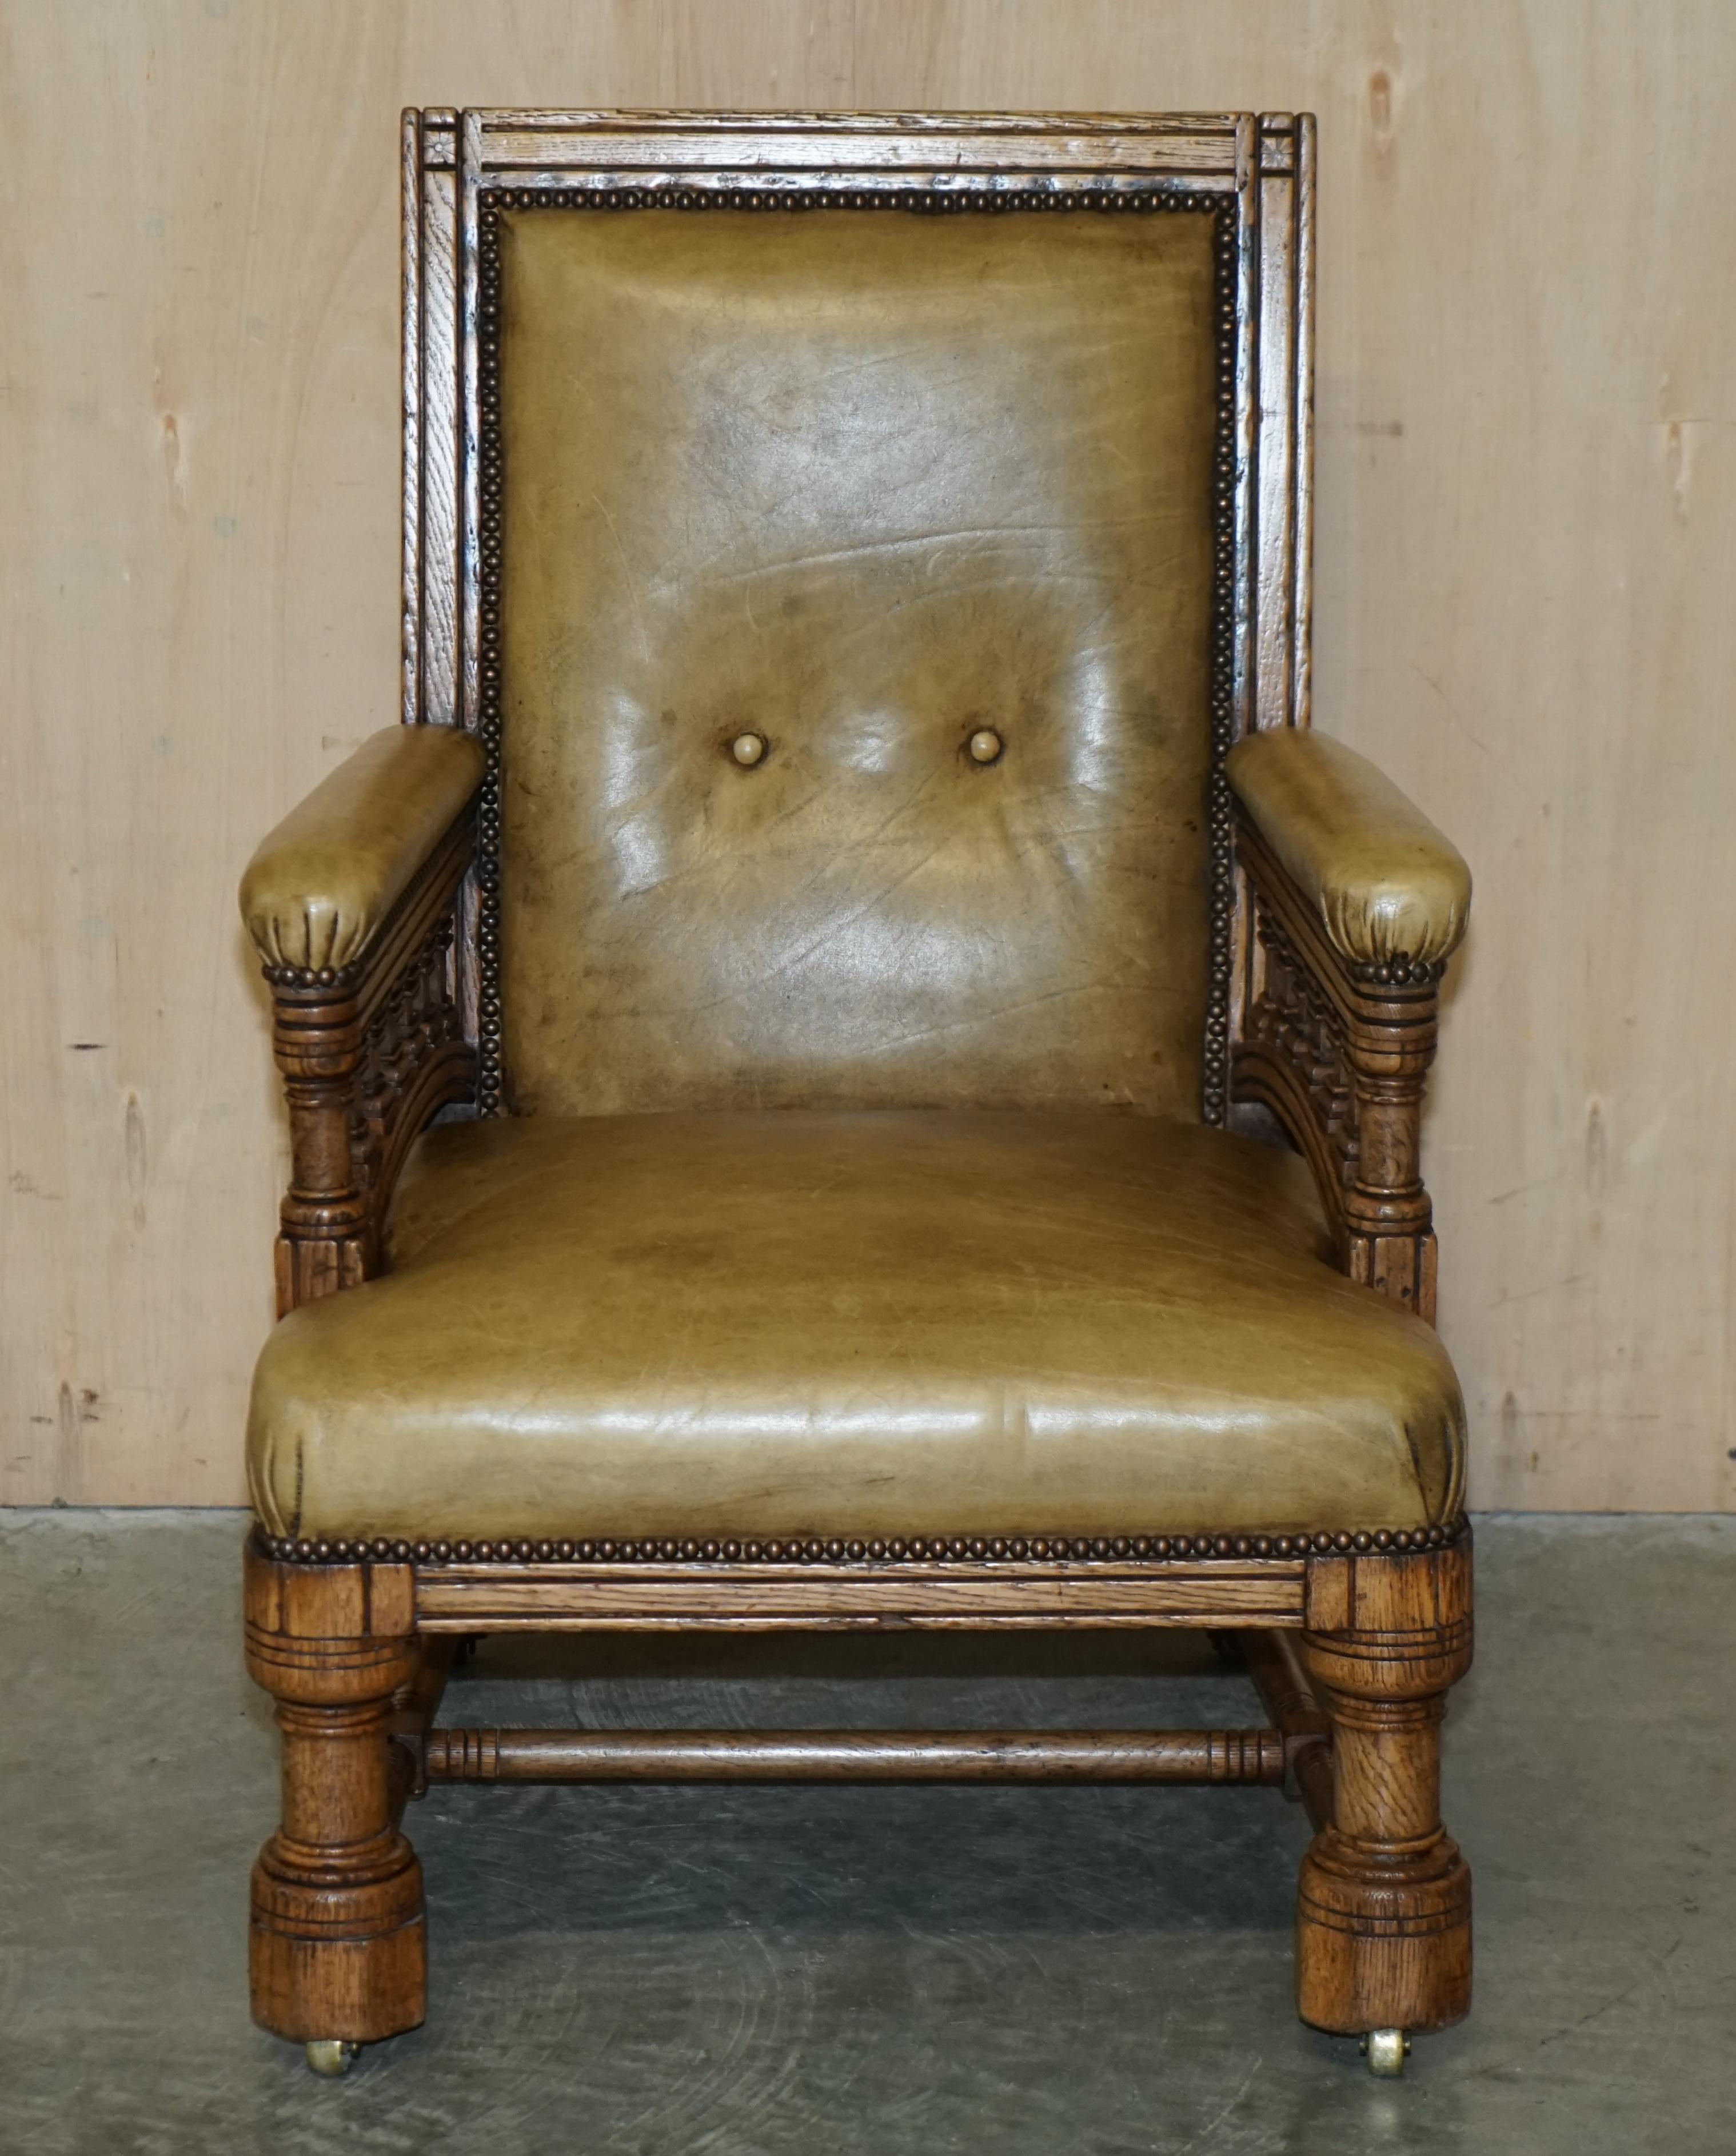 We are delighted to offer for sale this lovely original early Victorian oak carved library reading armchair with hand dyed leather upholstery.

Please note the delivery fee listed is just a guide, it covers within the M25 only for the UK and local